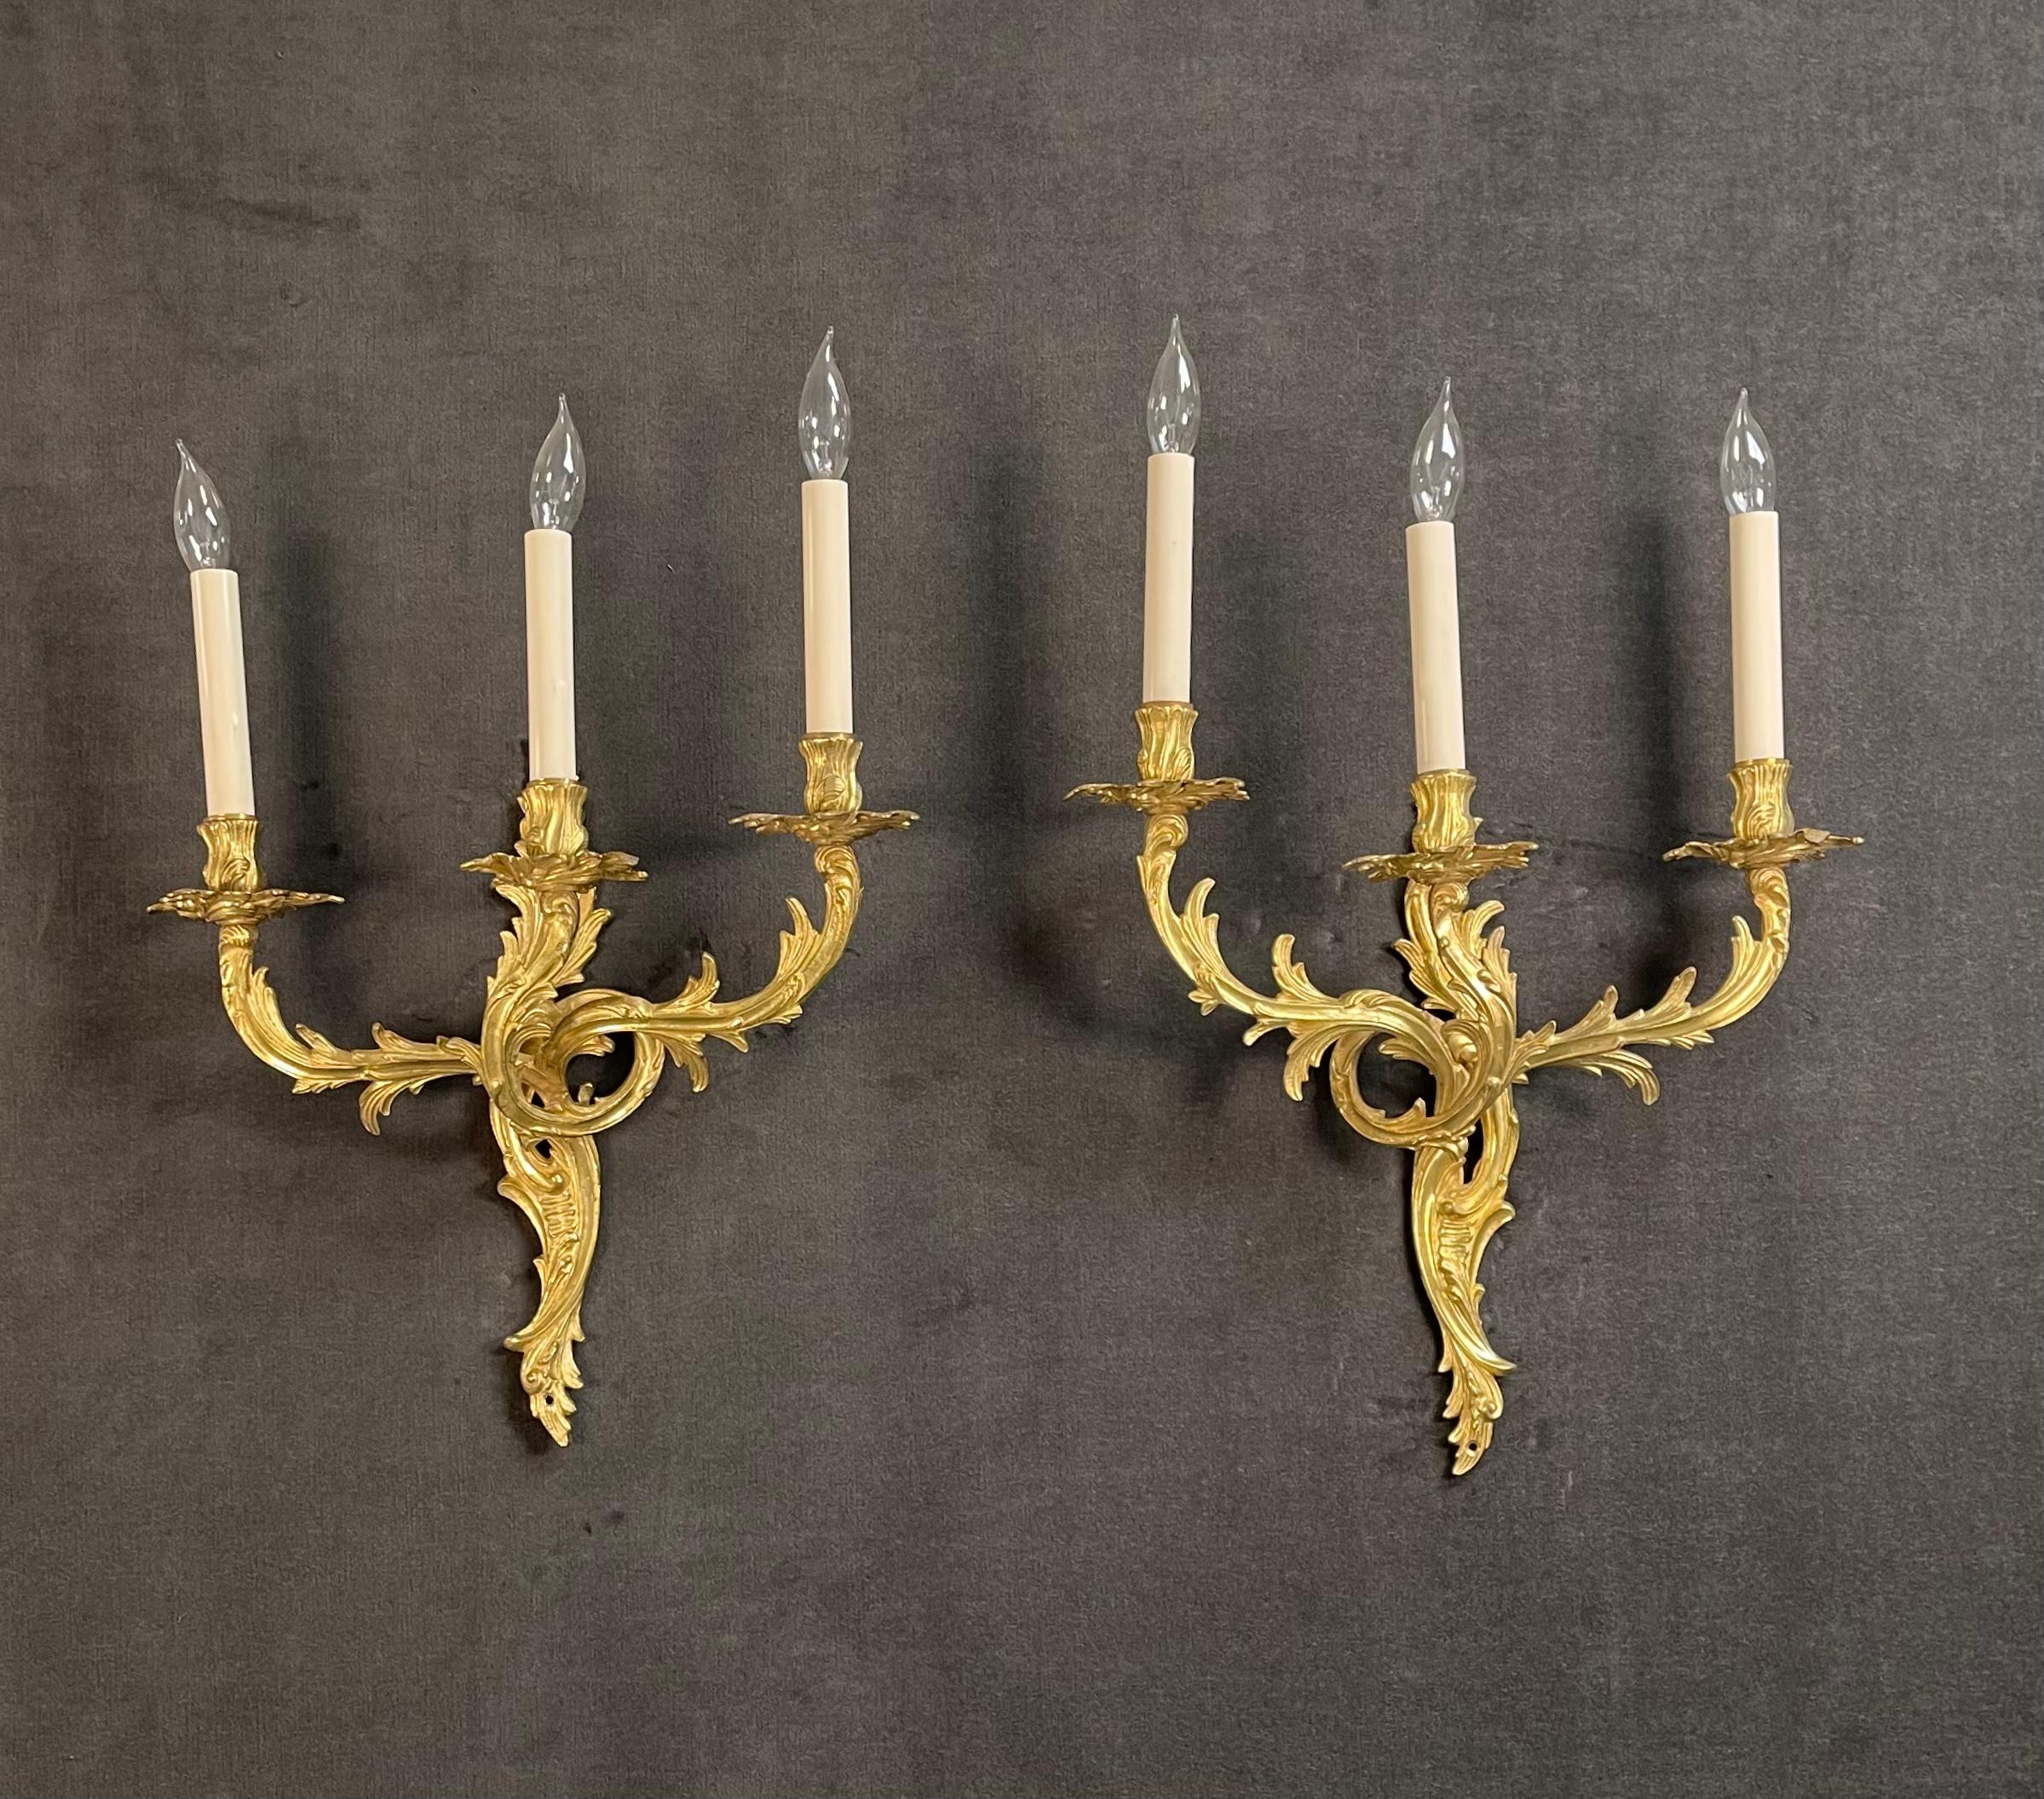 This lovely pair of gilt-bronze sconces, 
have been cleaned rewired and are ready to use.